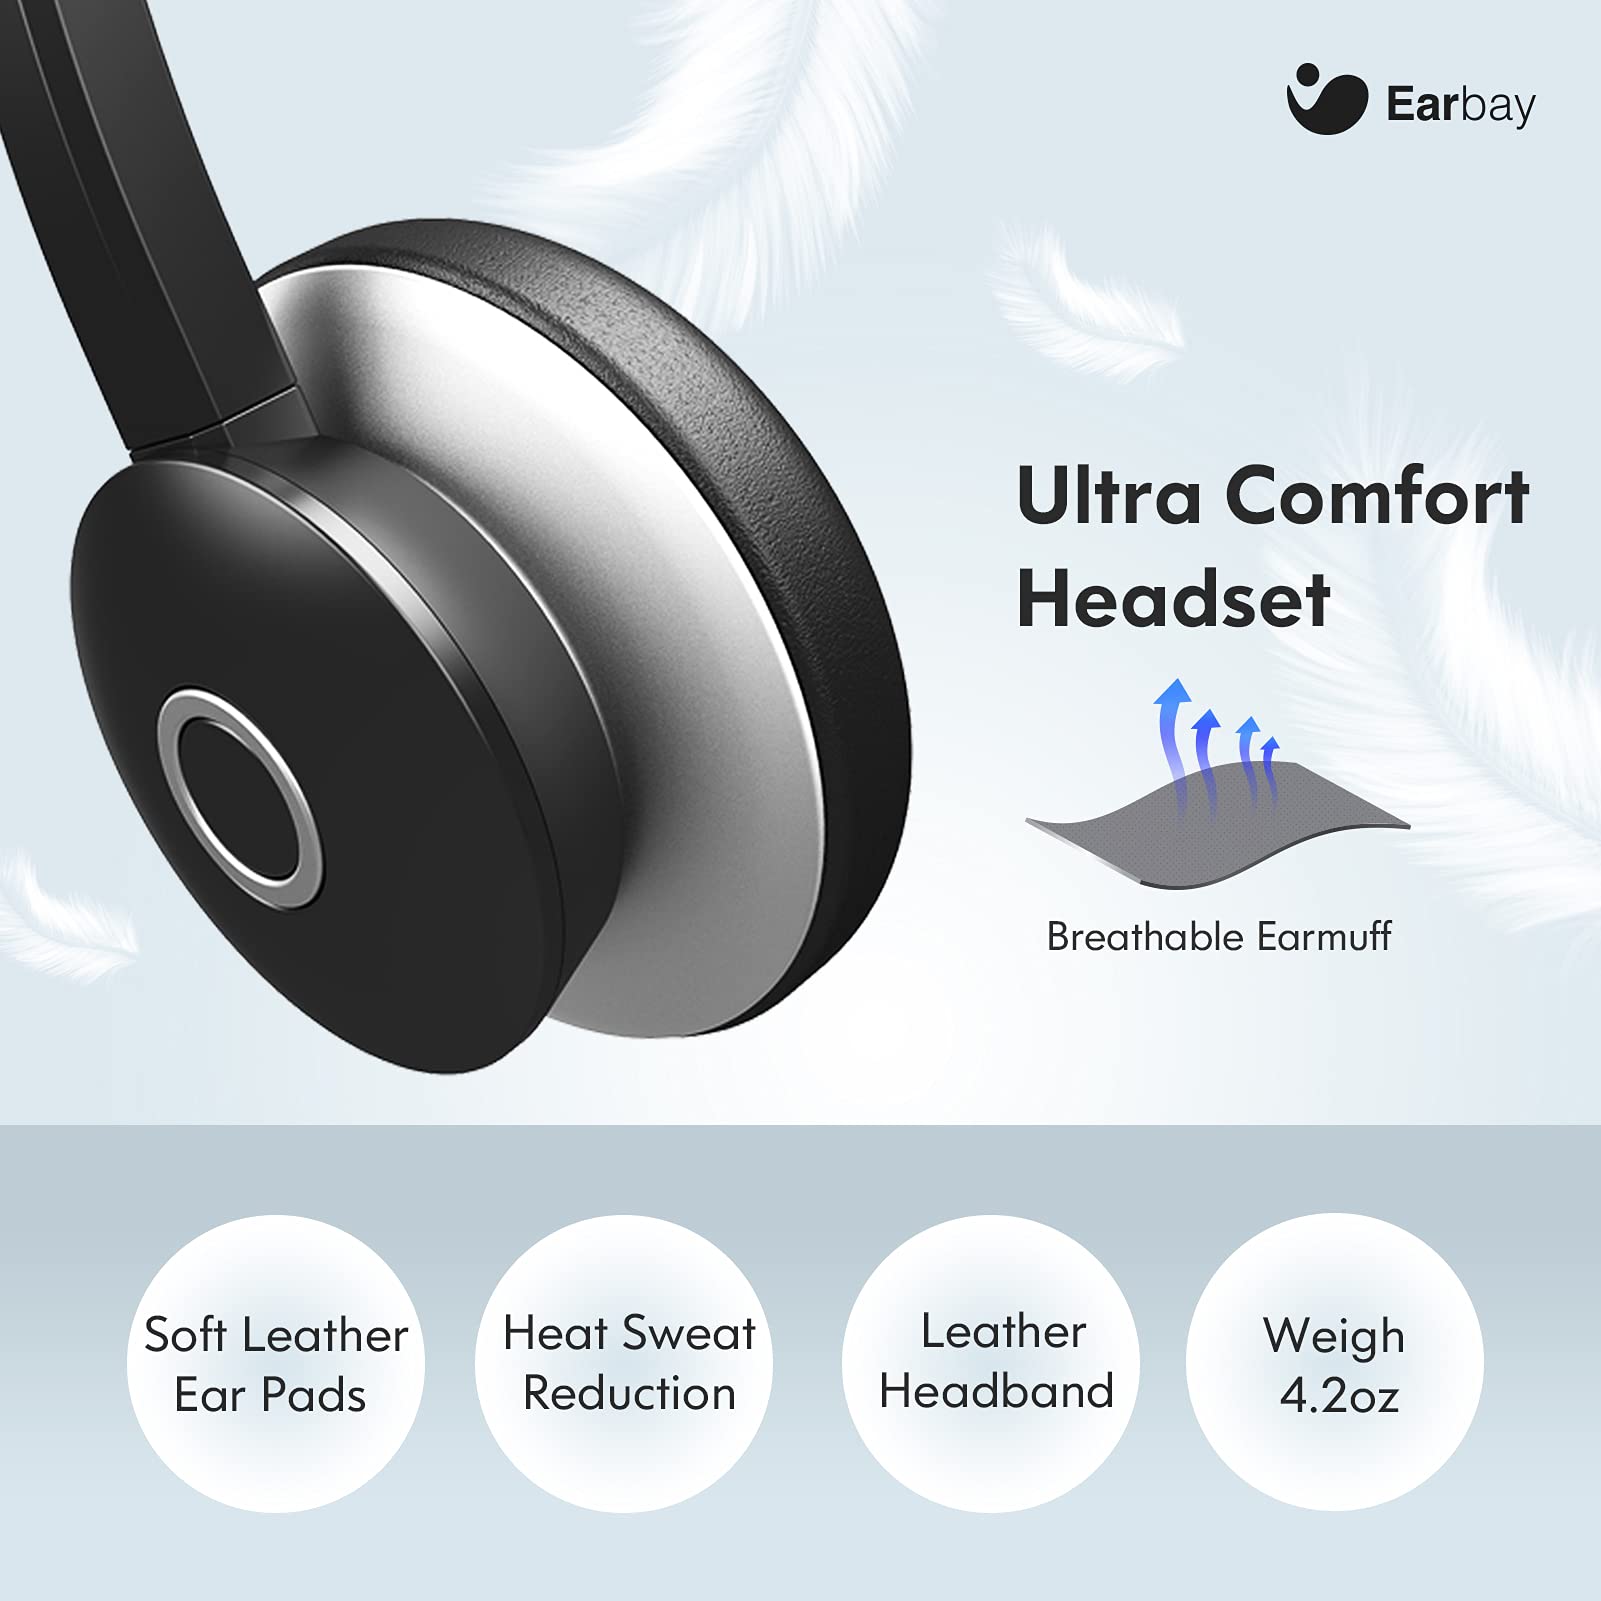 Earbay Black Silver USB Headset with Microphone 3.5mm Jack C682-U3